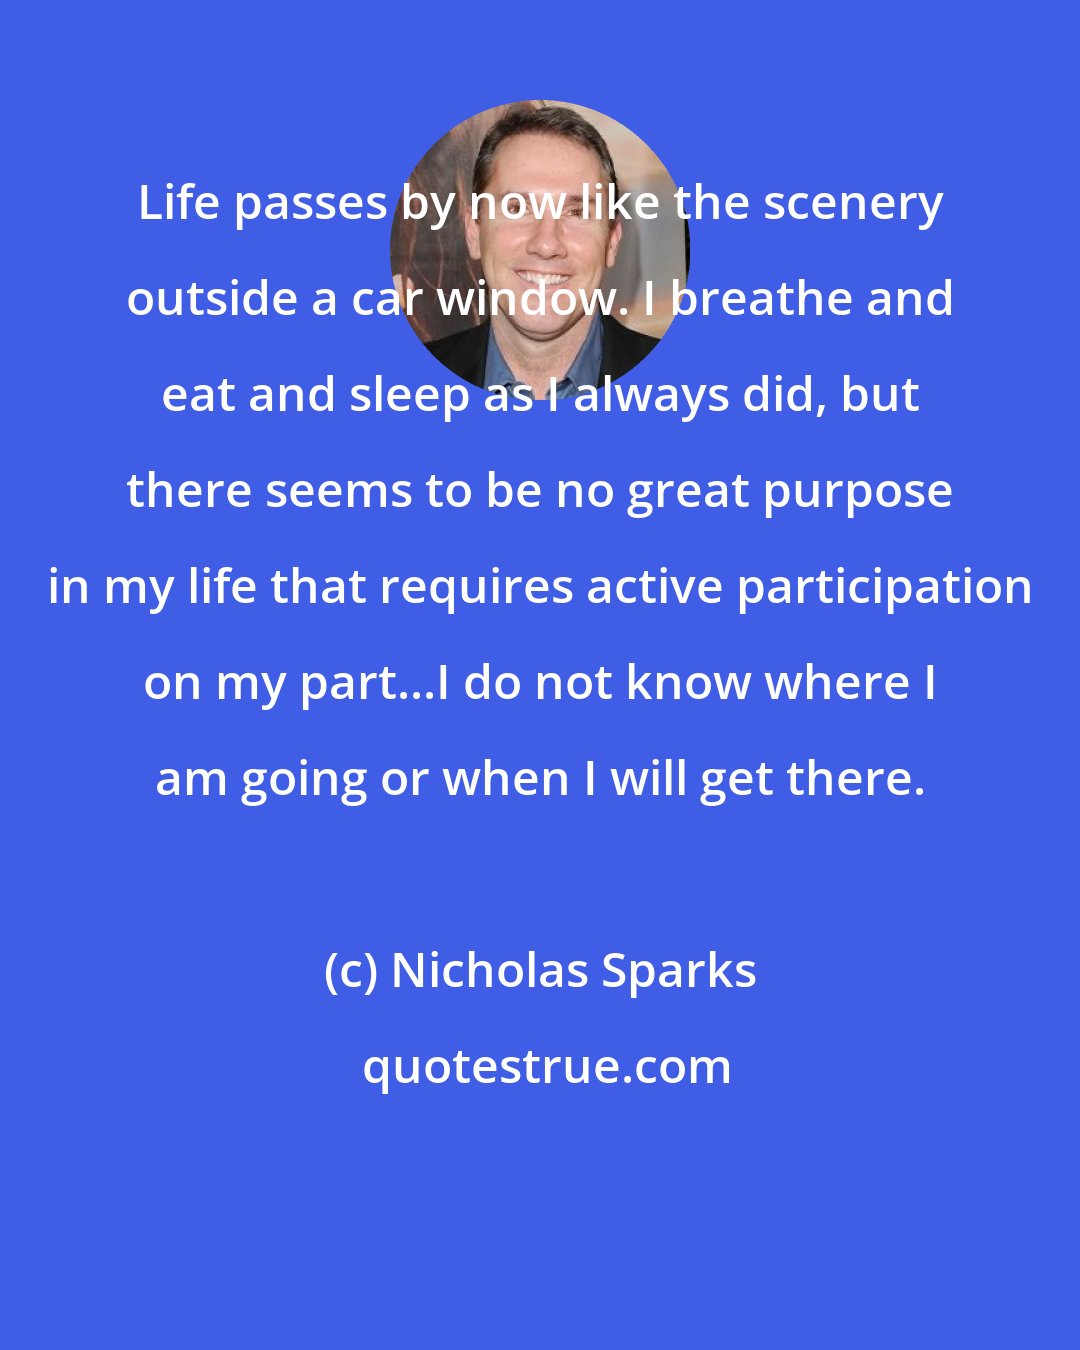 Nicholas Sparks: Life passes by now like the scenery outside a car window. I breathe and eat and sleep as I always did, but there seems to be no great purpose in my life that requires active participation on my part...I do not know where I am going or when I will get there.